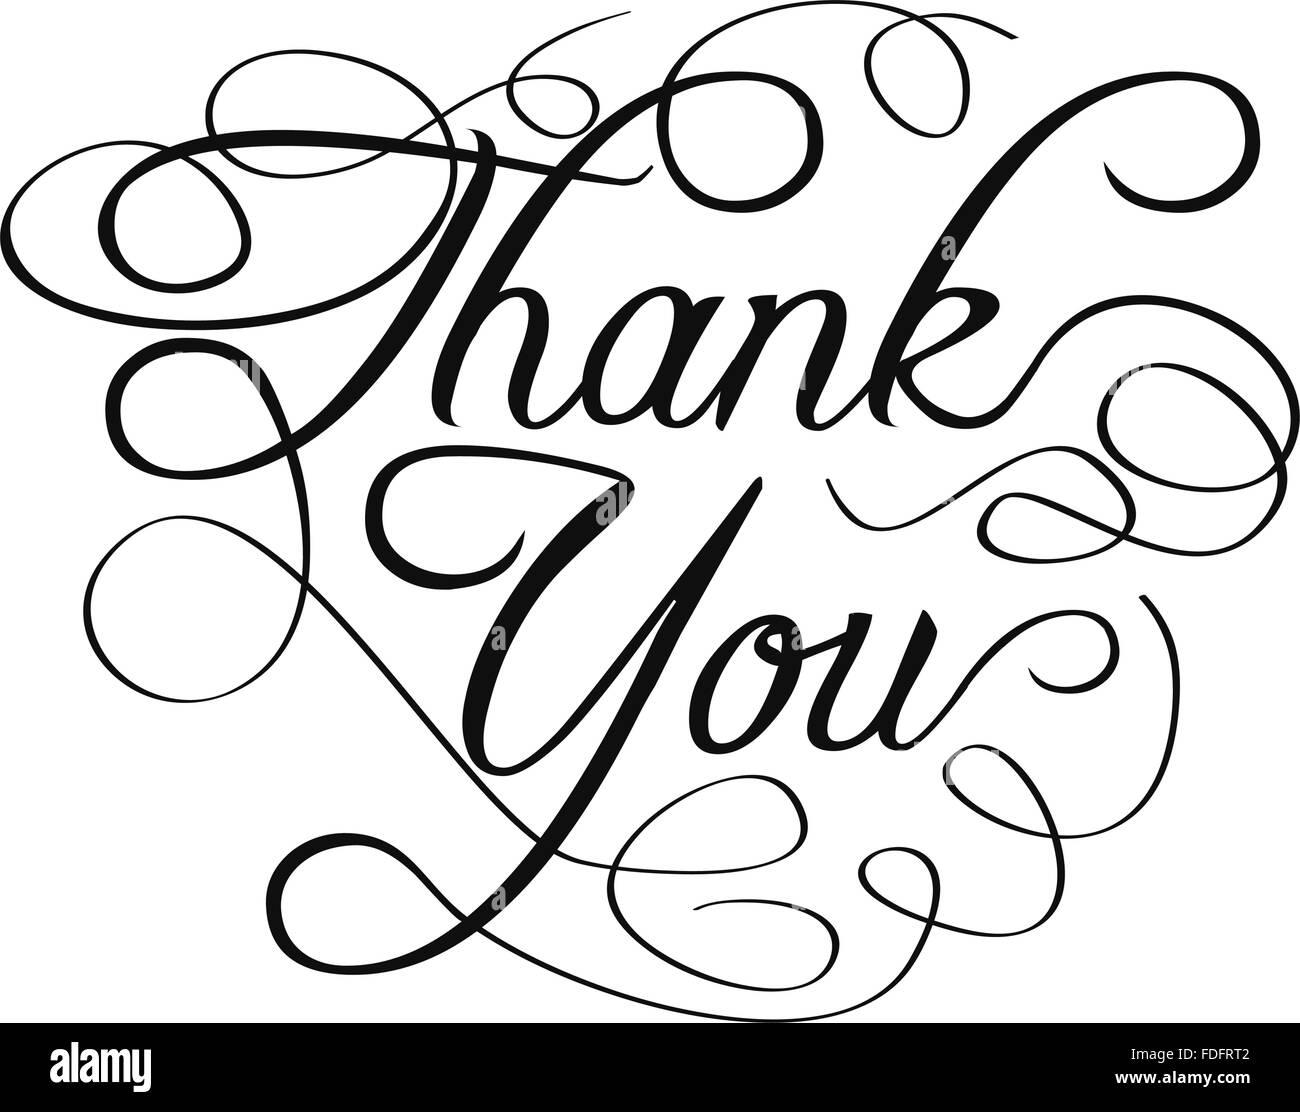 thank you words with swirls Stock Vector